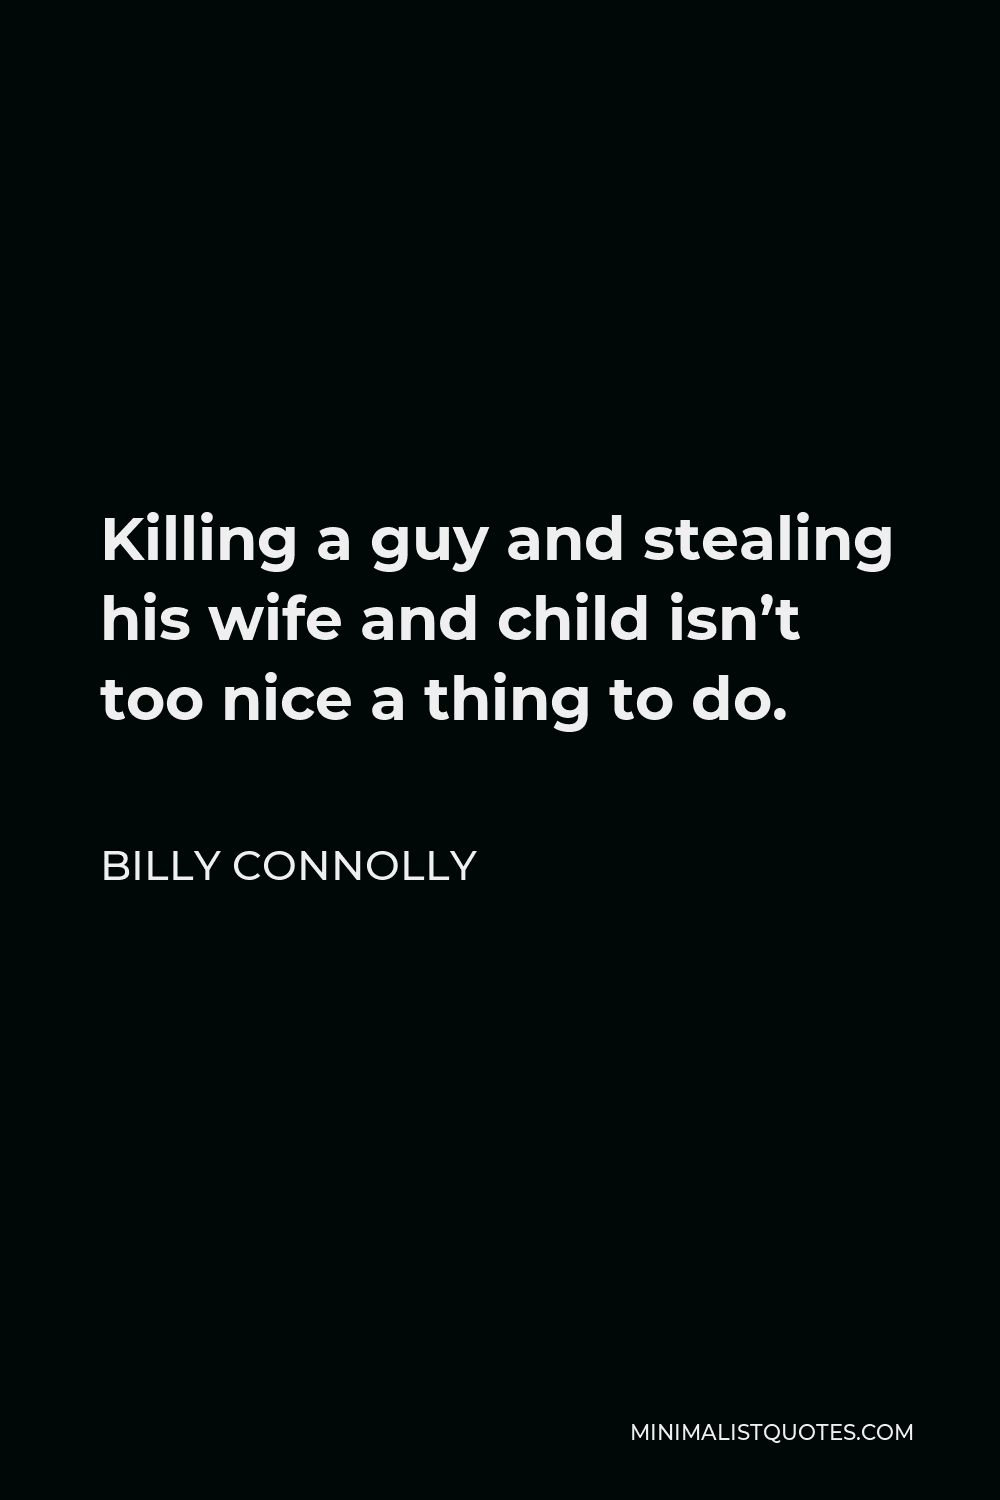 Billy Connolly Quote - Killing a guy and stealing his wife and child isn’t too nice a thing to do.